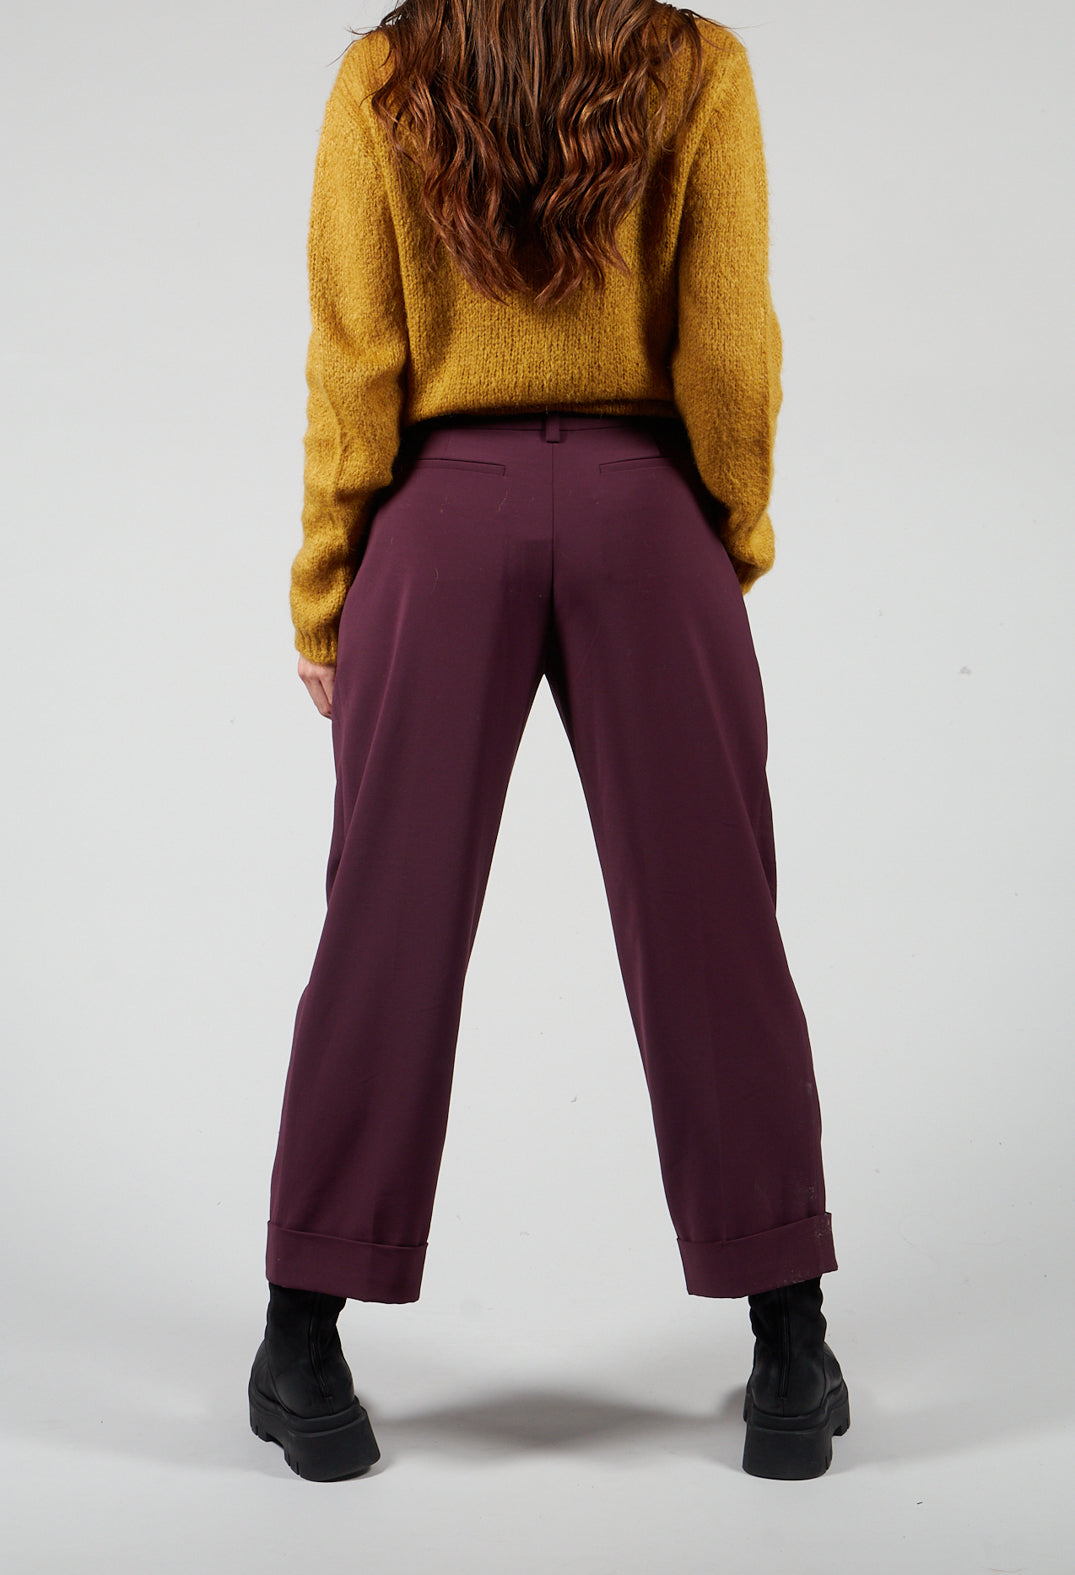 Pegged Trousers in Burgundy